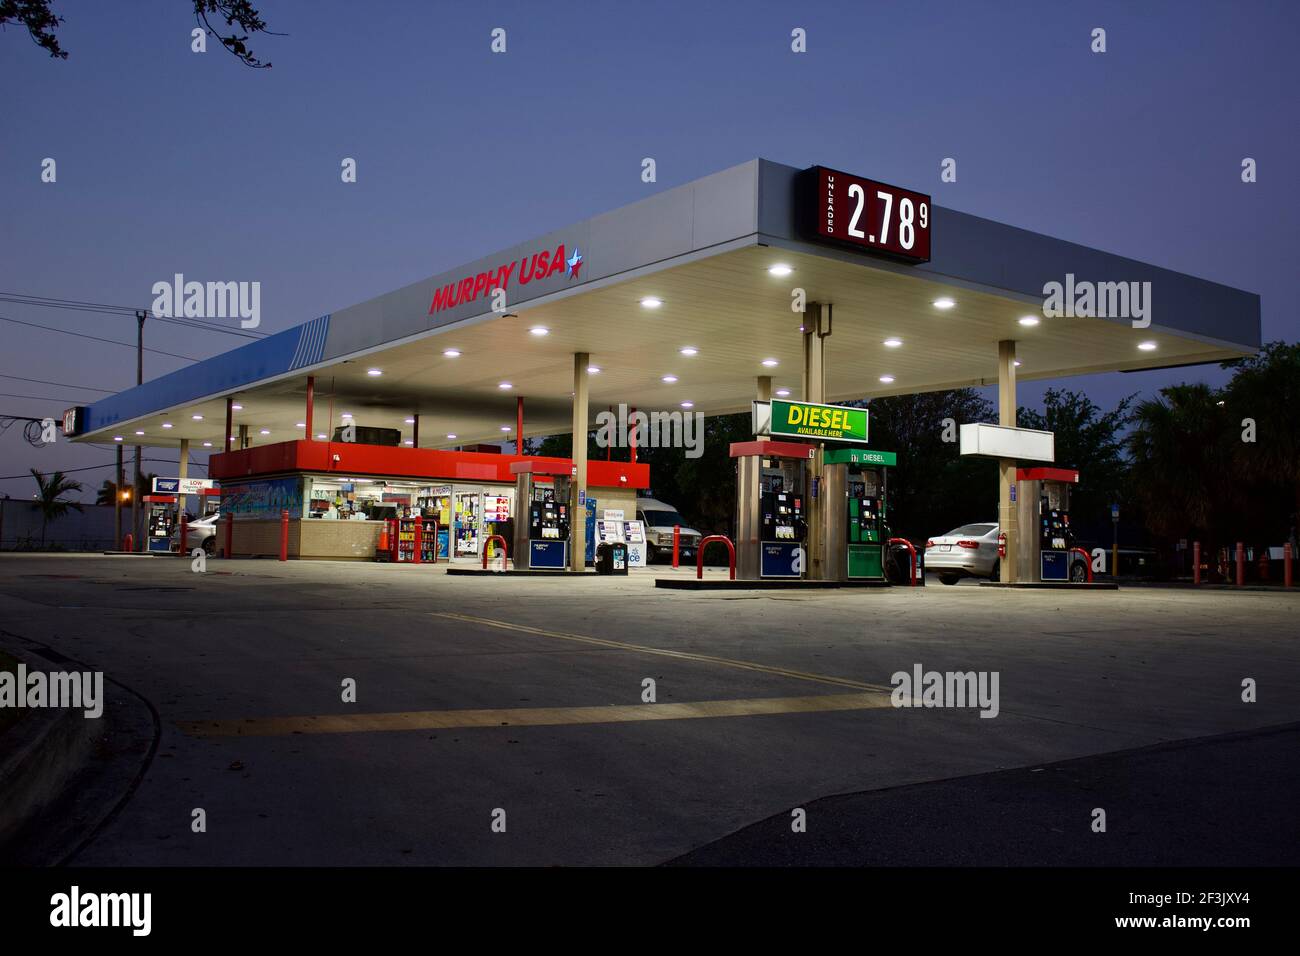 4/14/2021 Miami Florida - Murphy USA gas station and convenience store located on an out parcel of a Walmart Supercenter. Evening Stock Photo